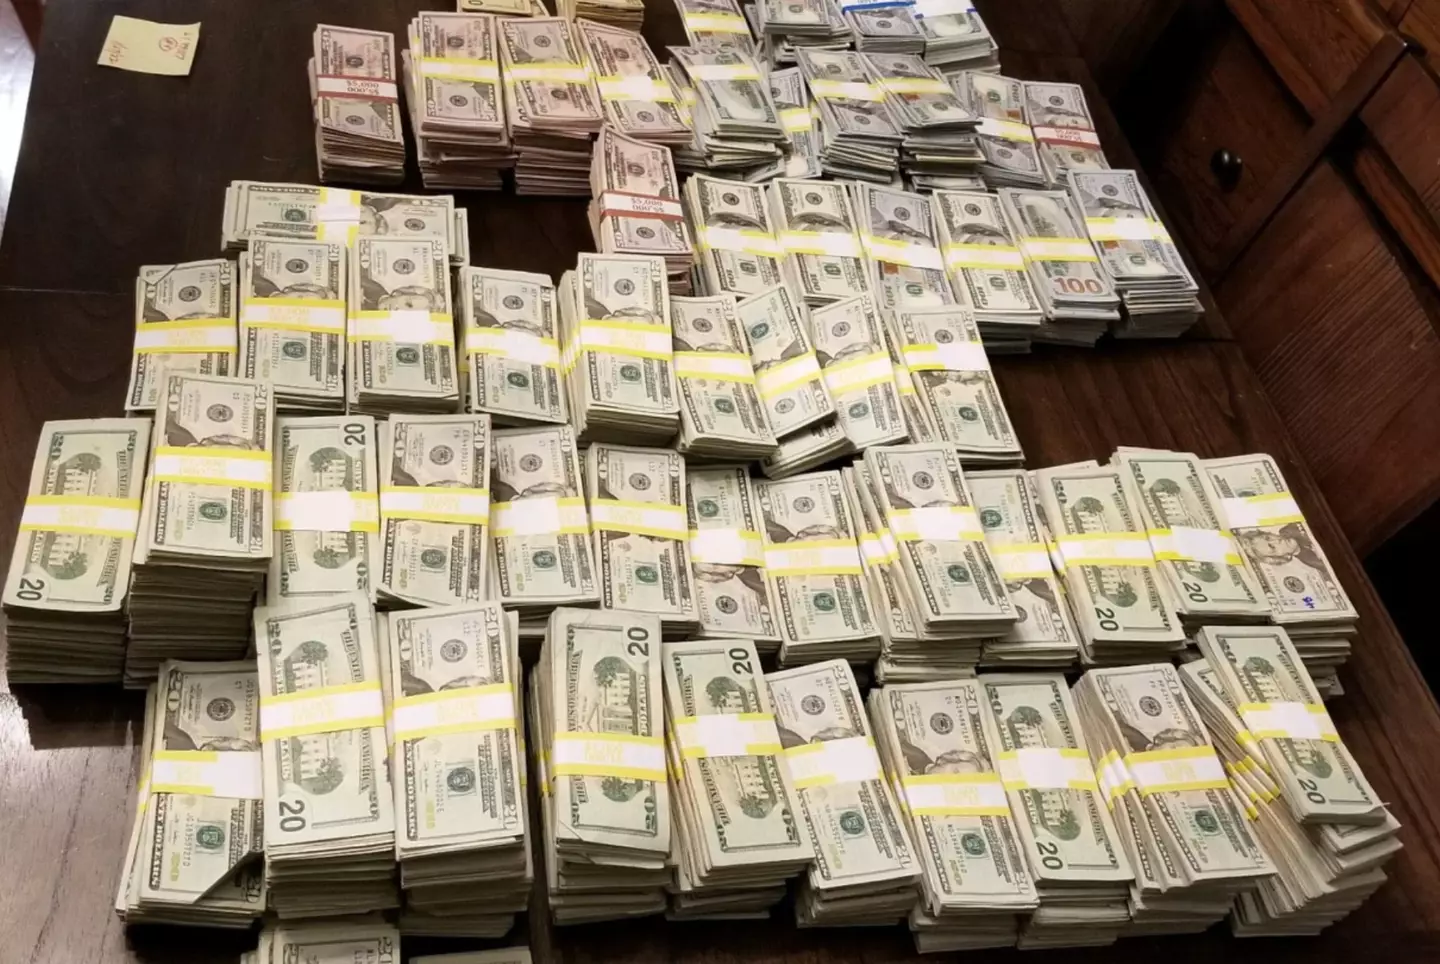 Cash seized (Suffolk County District Attorney's Office)